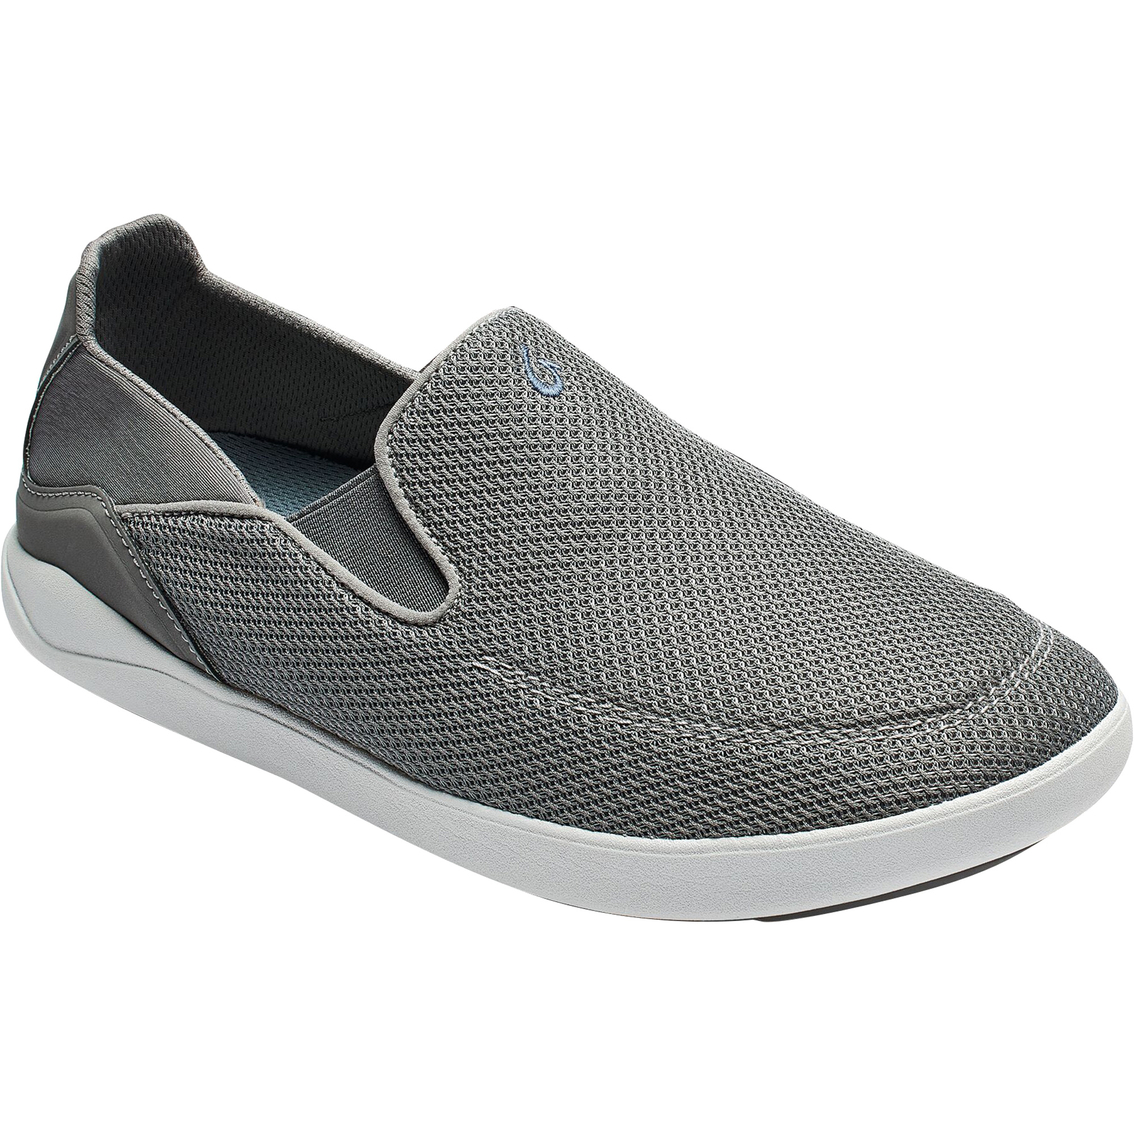 Olukai Men's Nohea Pae Slip-on Sneakers | Casuals | Shoes | Shop The ...